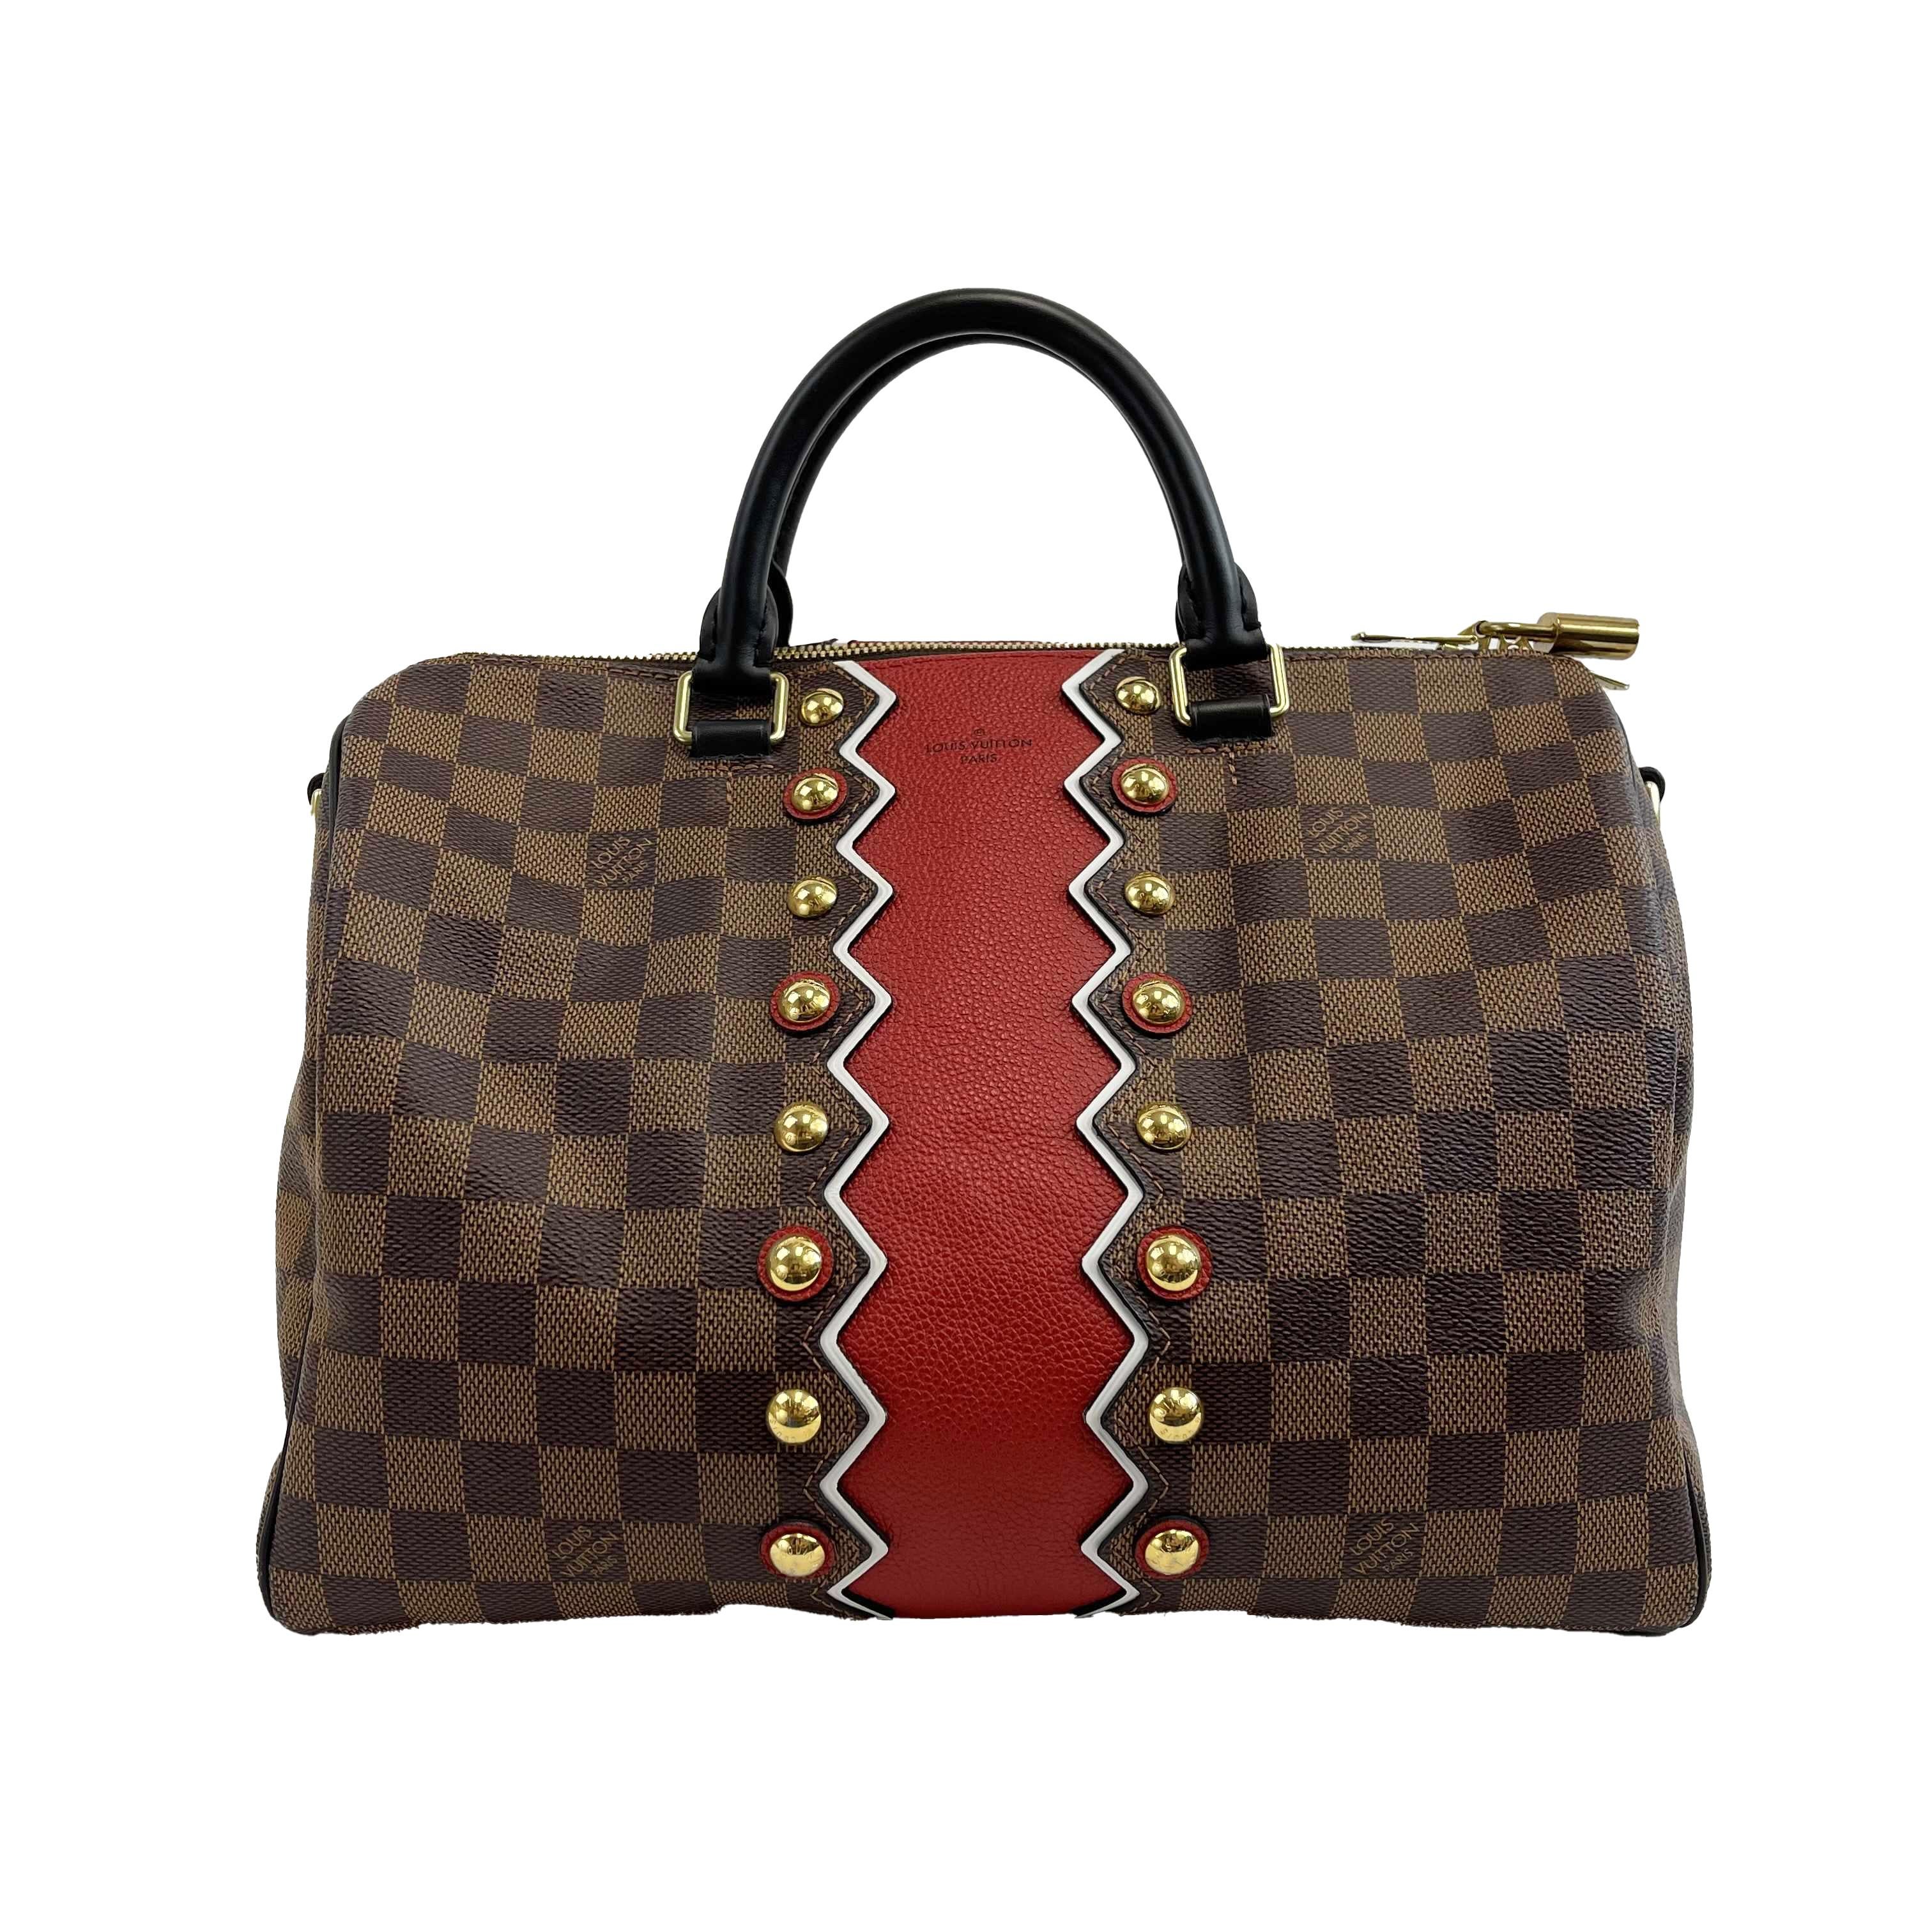 Louis Vuitton - LV Damier Ebene Karakoram Speedy Bandouliere 30 w/ Strap

Description

* Circa 2018
* Damier Ebene coated canvas
* Gold hardware
* Two leather rolled handles
* Red and white leather detail on front and back
* Sixteen gold circles